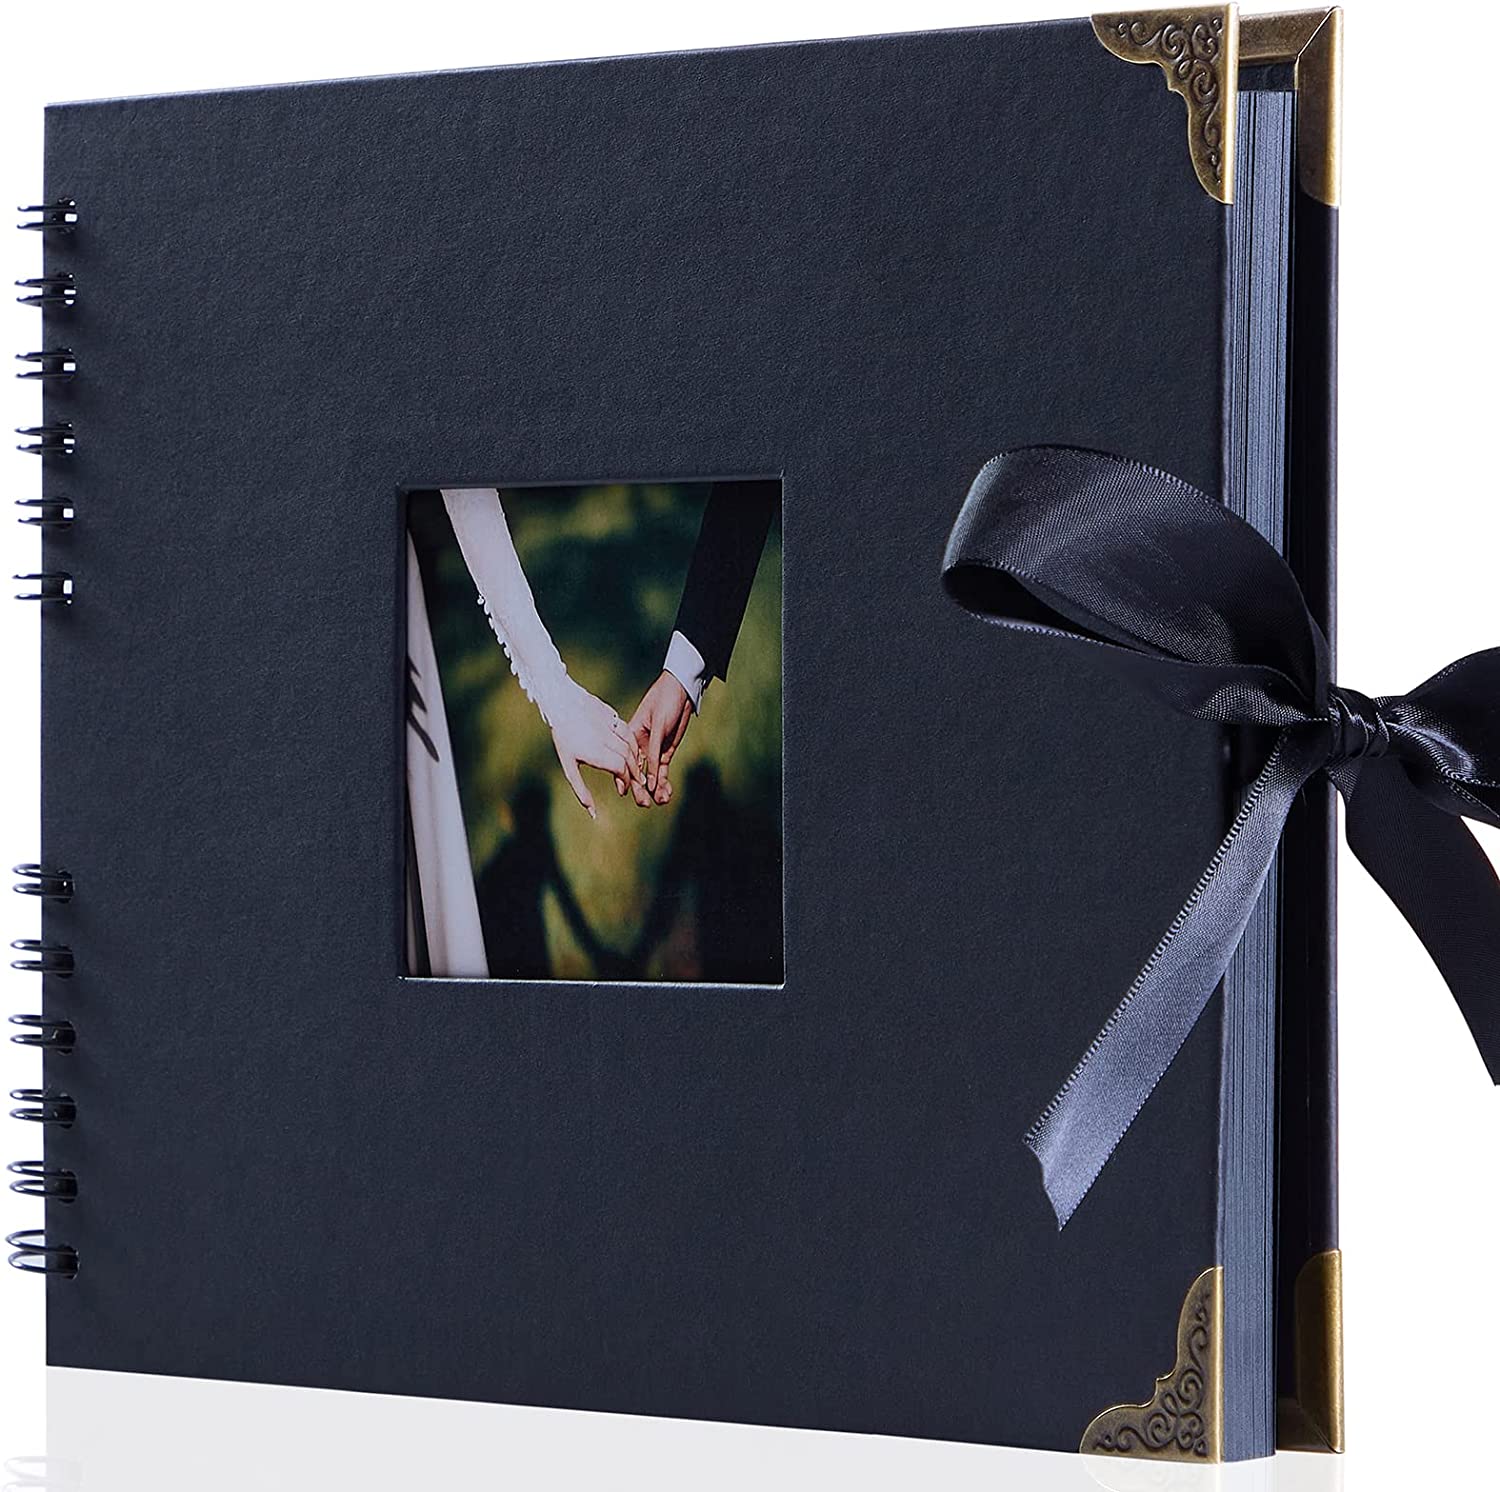 Scrapbook Photo Album Black Paper Pages DIY Scrapbook Album Black Sheet Pages Wedding Anniversary Baby Family Memory Gift 7x7 Inches Black Scrapbook